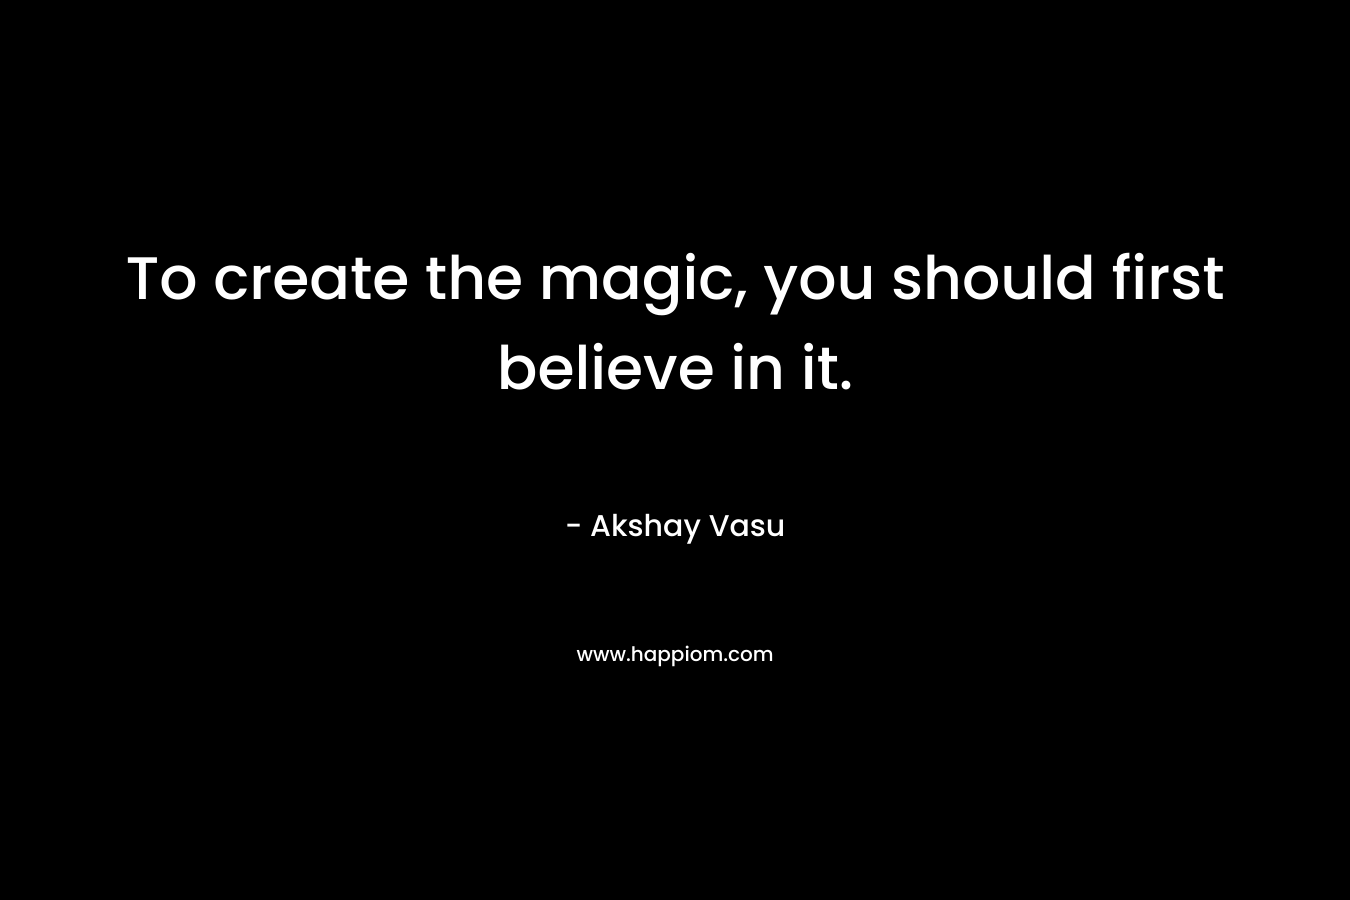 To create the magic, you should first believe in it.